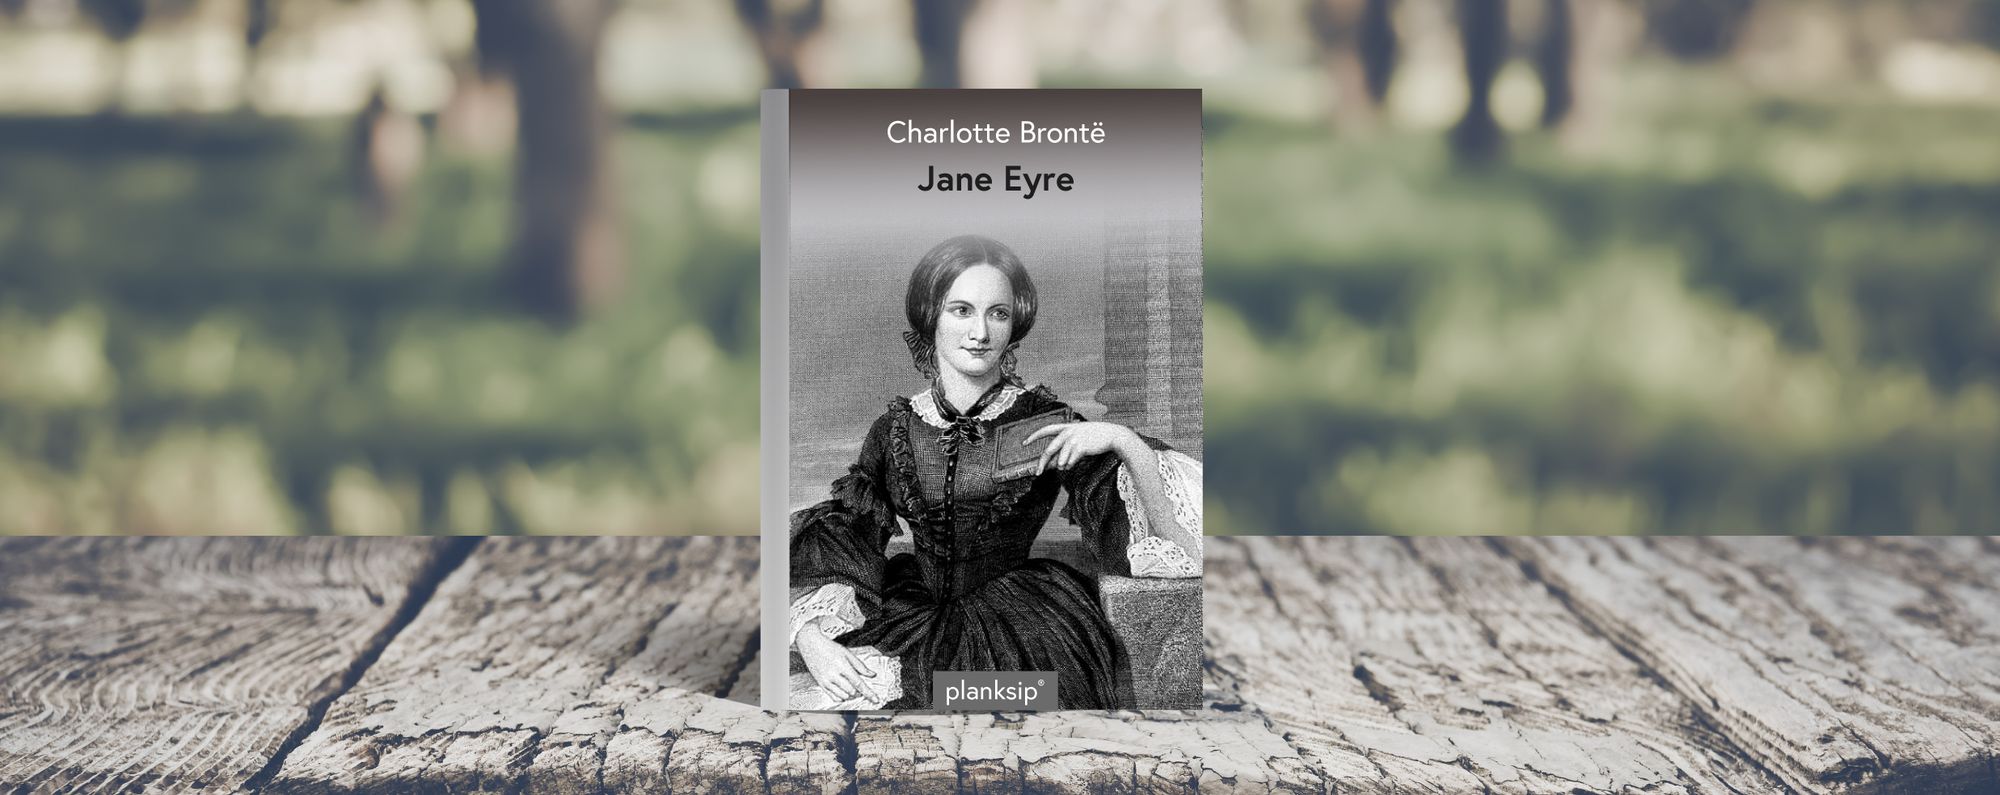 Lost Charlotte Brontë story comes to light